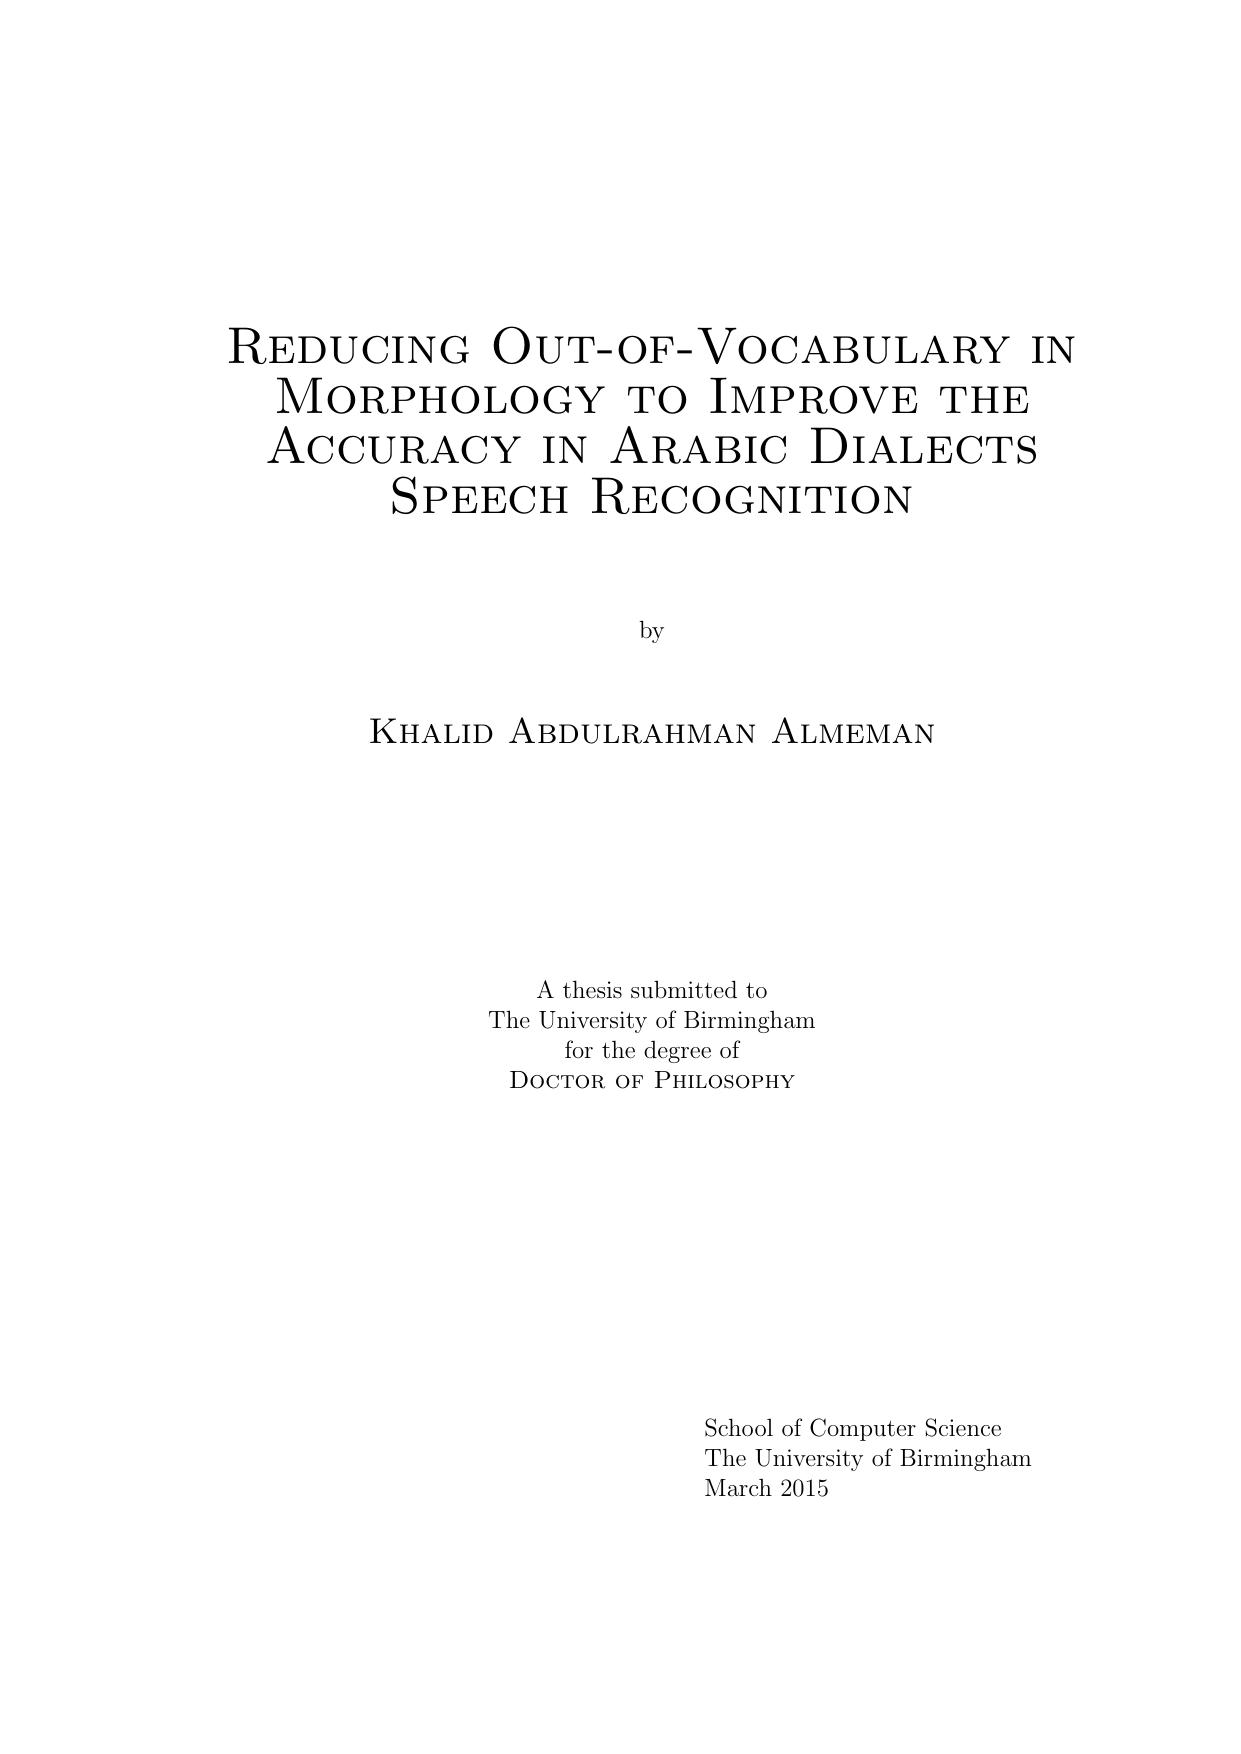 Reducing out-of-vocabulary in morphology to improve the accuracy in Arabic dialects speech recognition